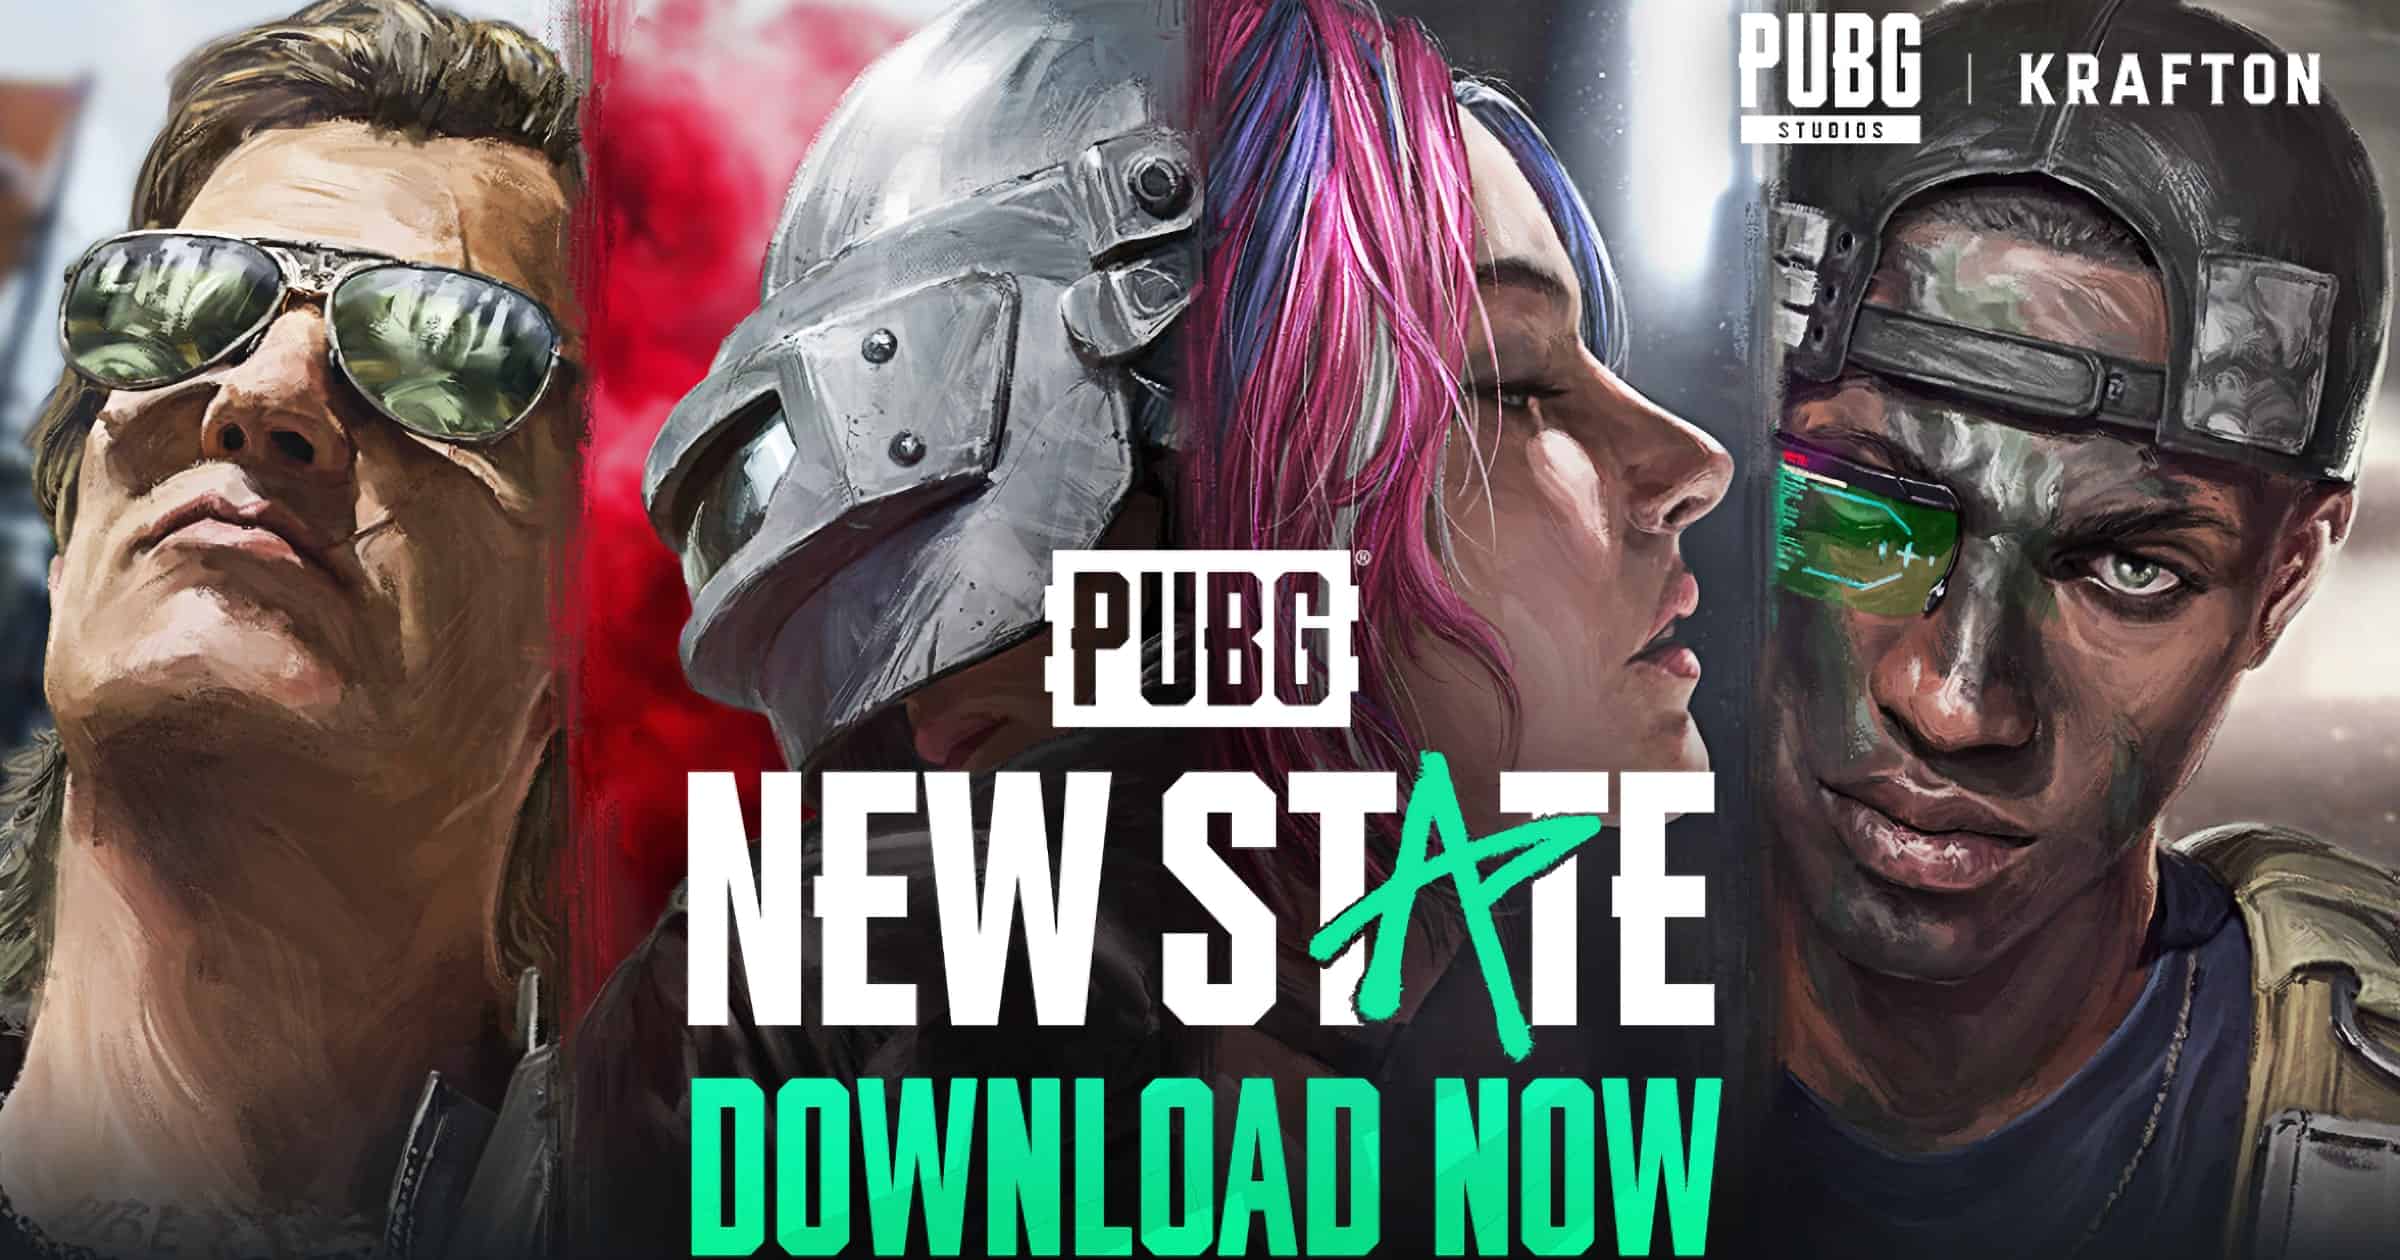 ‘PUBG: New State’ Launches in Over 200 Countries on Mobile Platforms